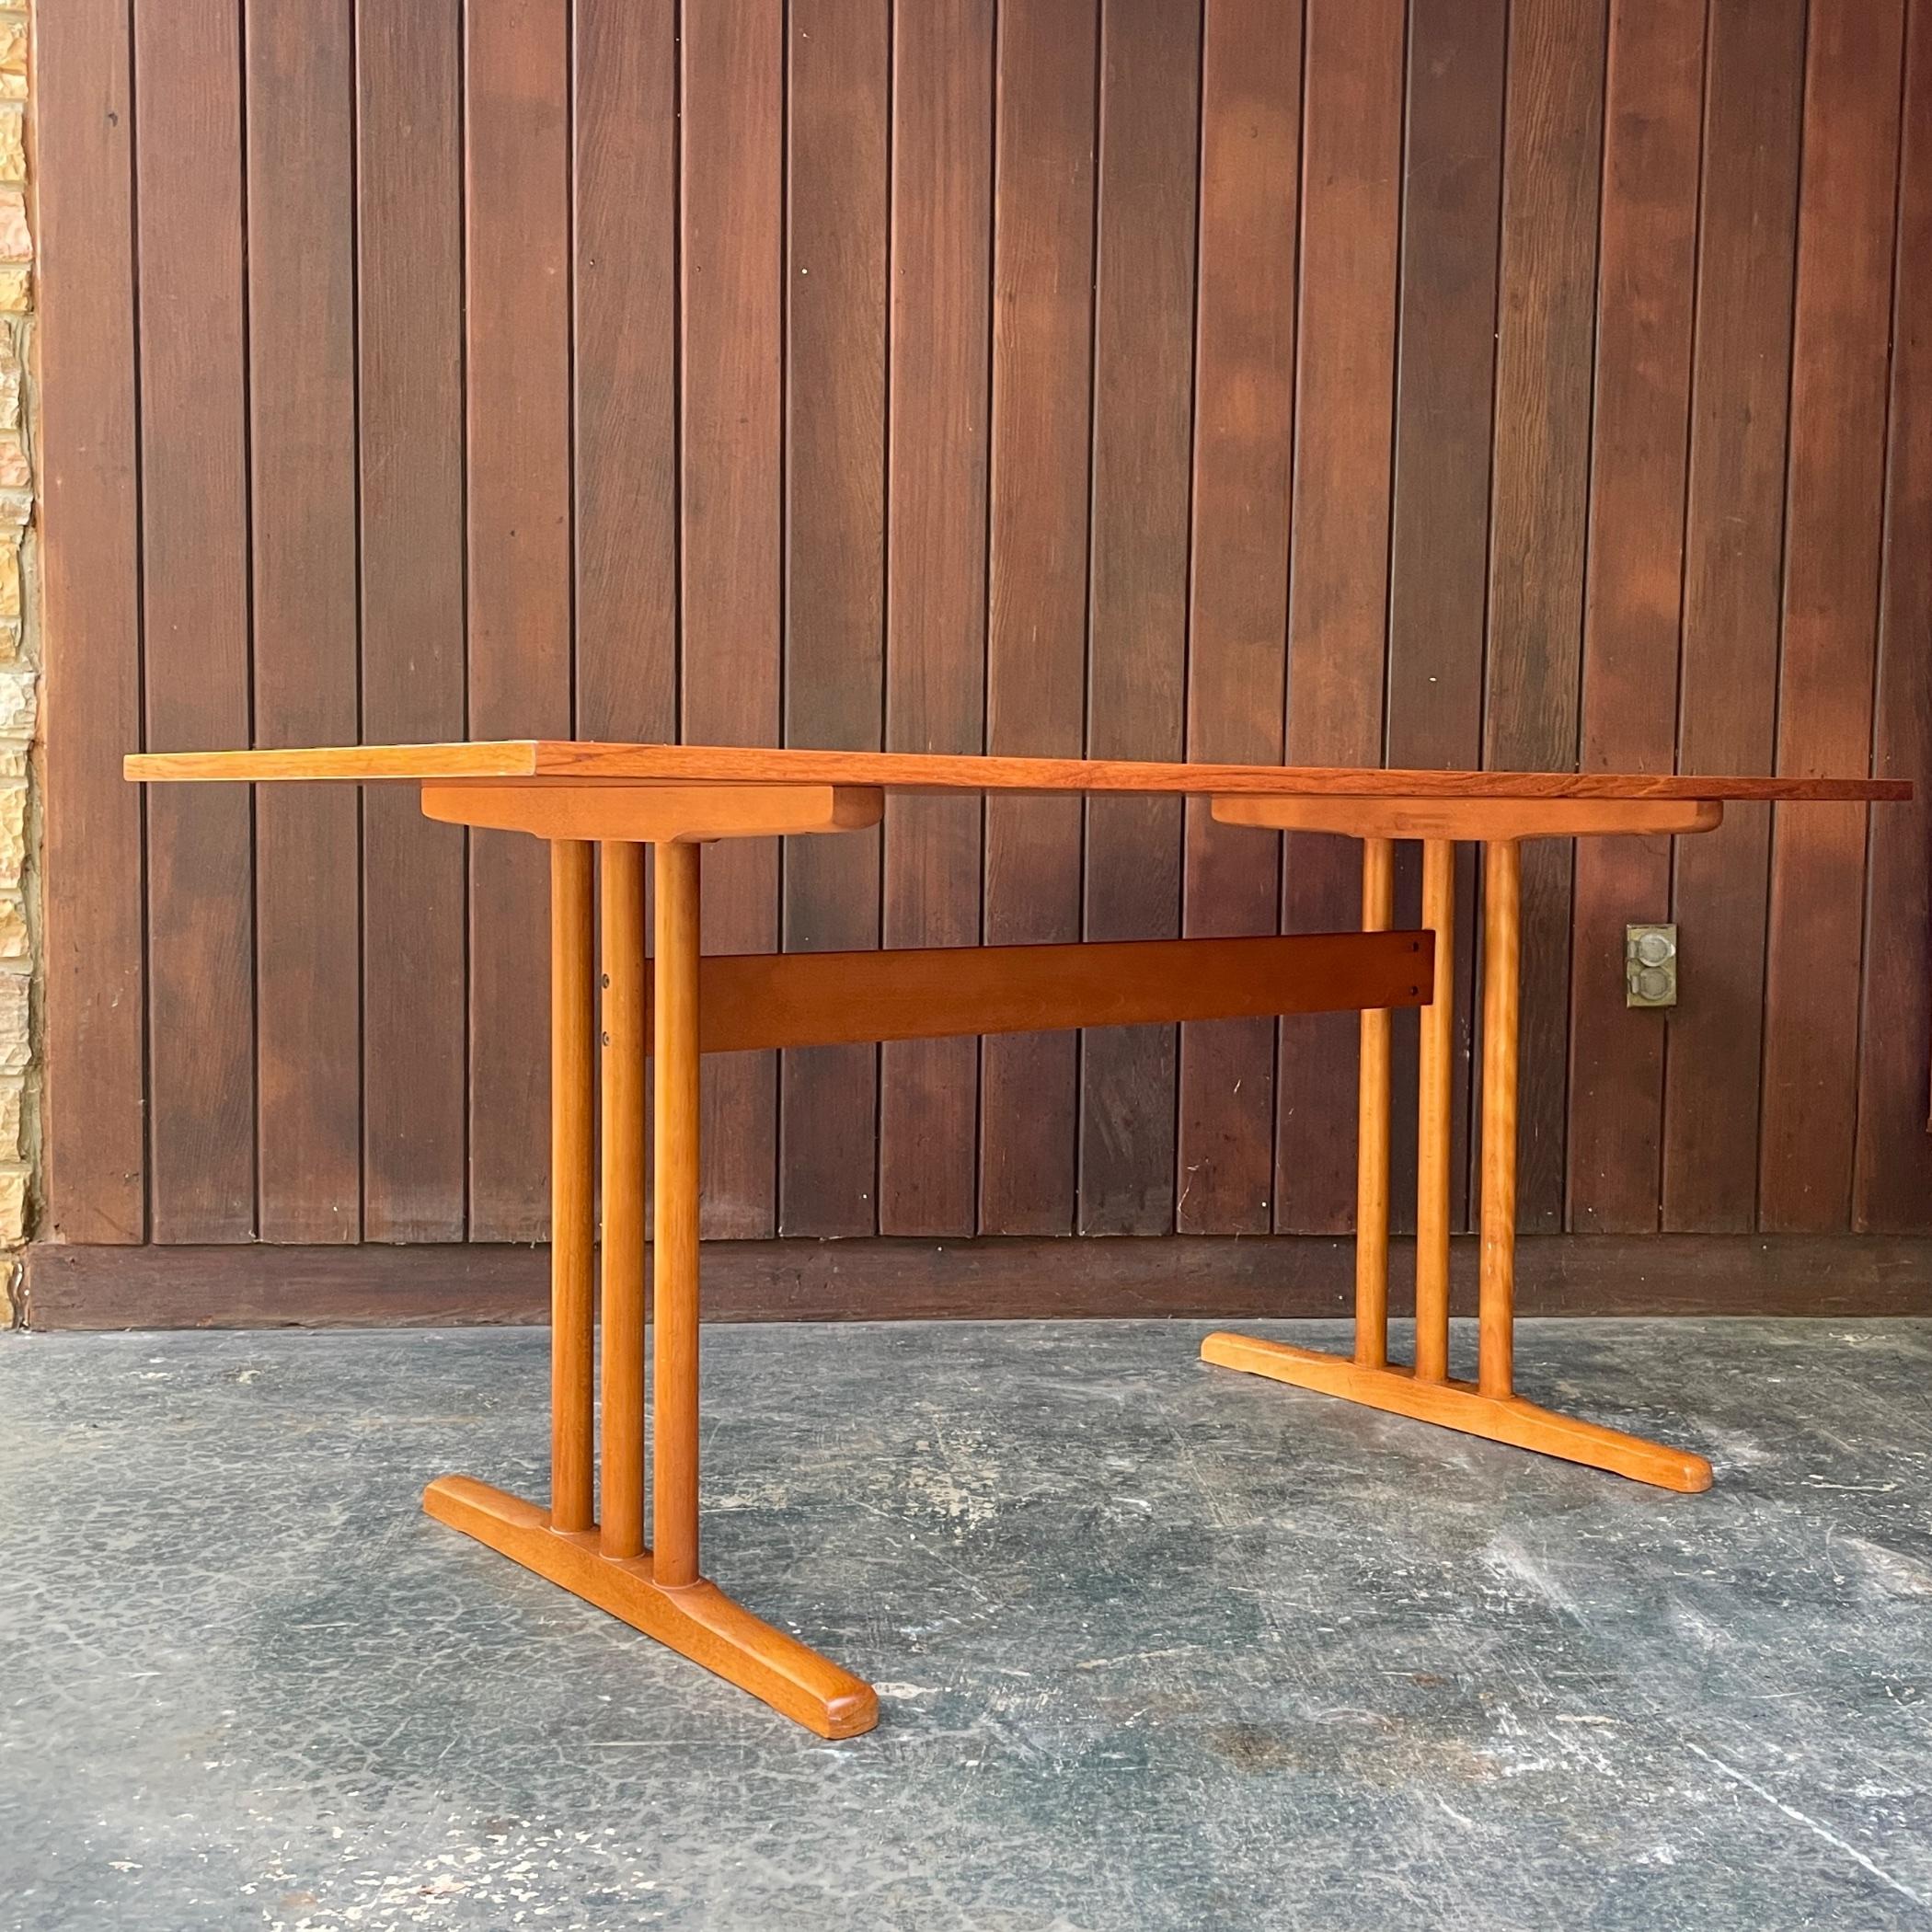 Heavy solid and stable mid-century Danish Worktable that could also be used as a dining table for two.

The top is solid wood core with a Teak Veneer, showing lots of wear on it; a few bubble, gouges, scratches, and a patch with some rippling of